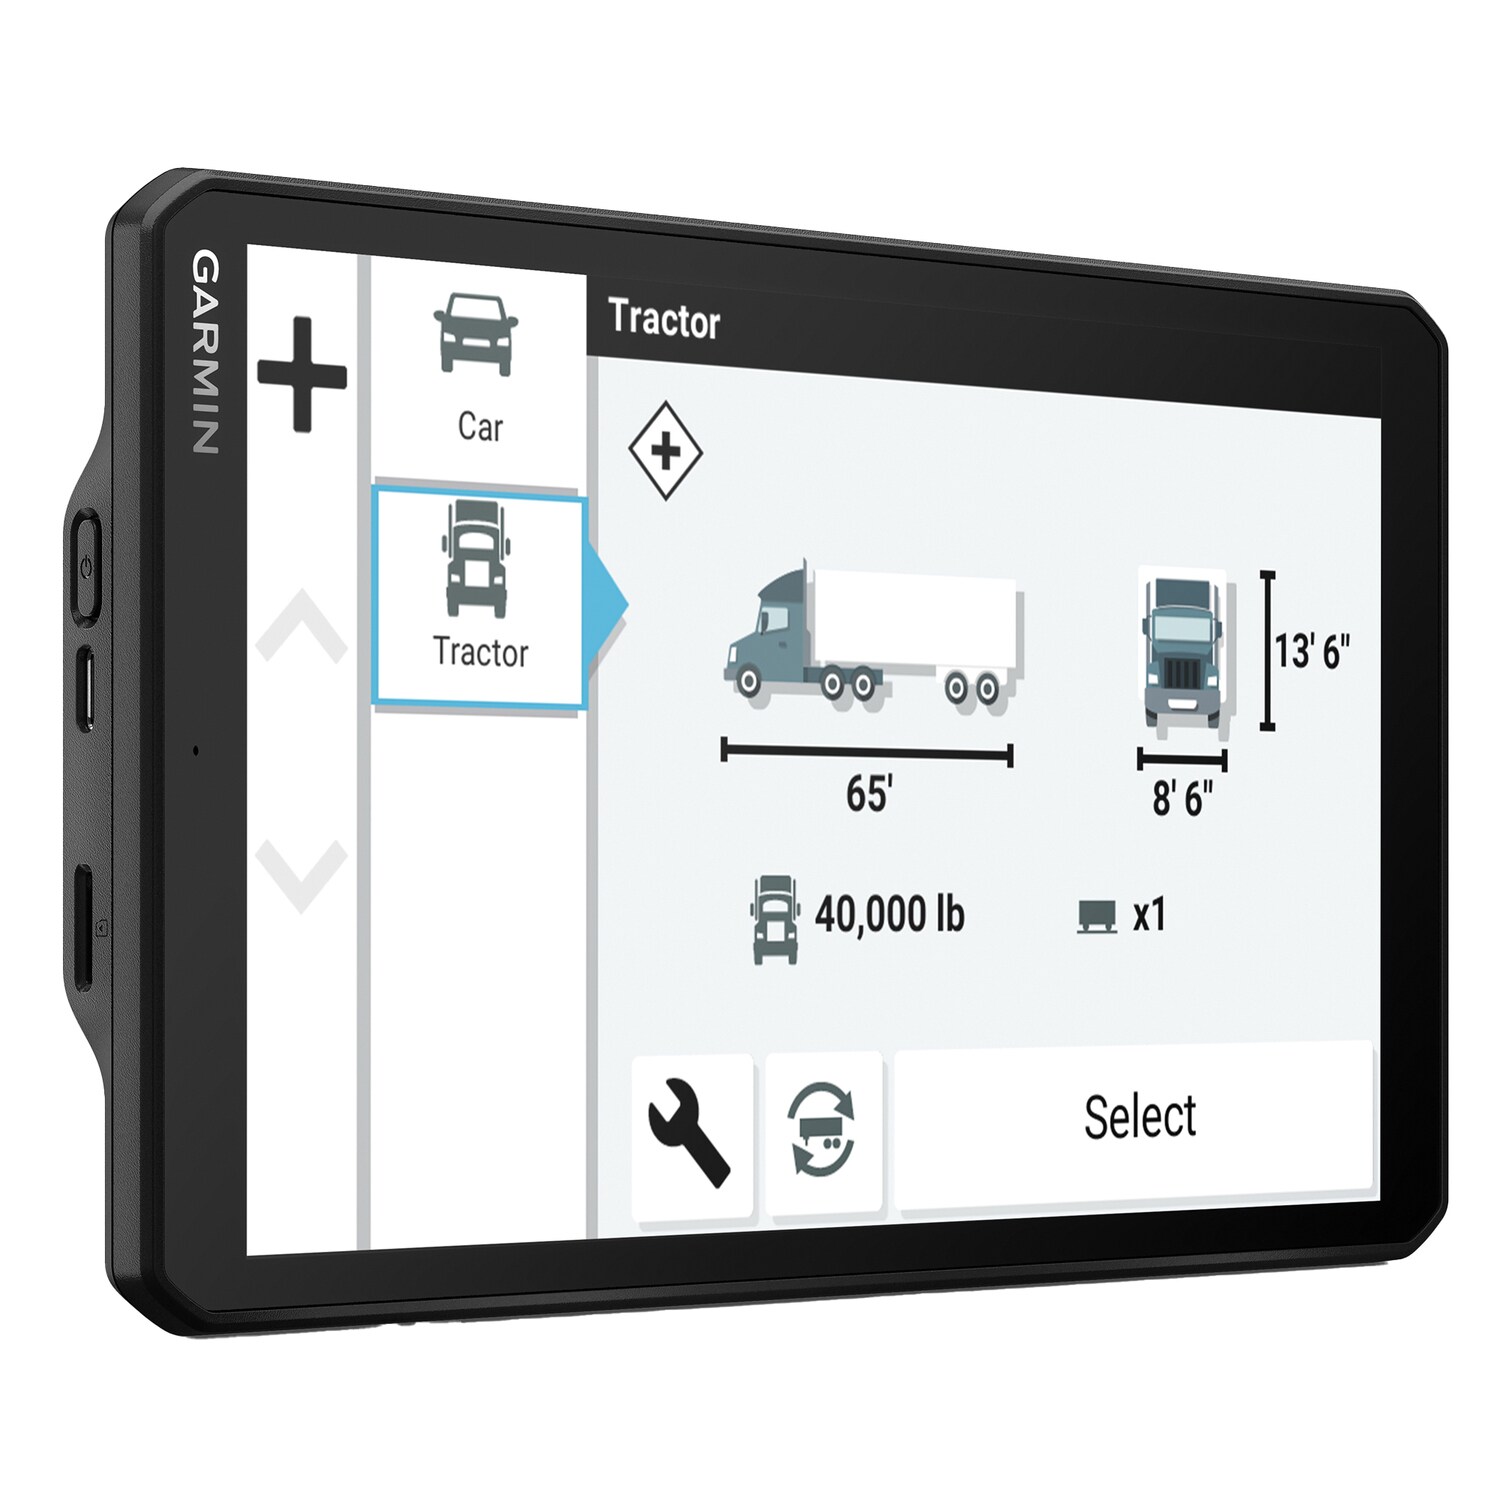 Dezl Gps for Truck in the Interior Car Accessories department at Lowes.com